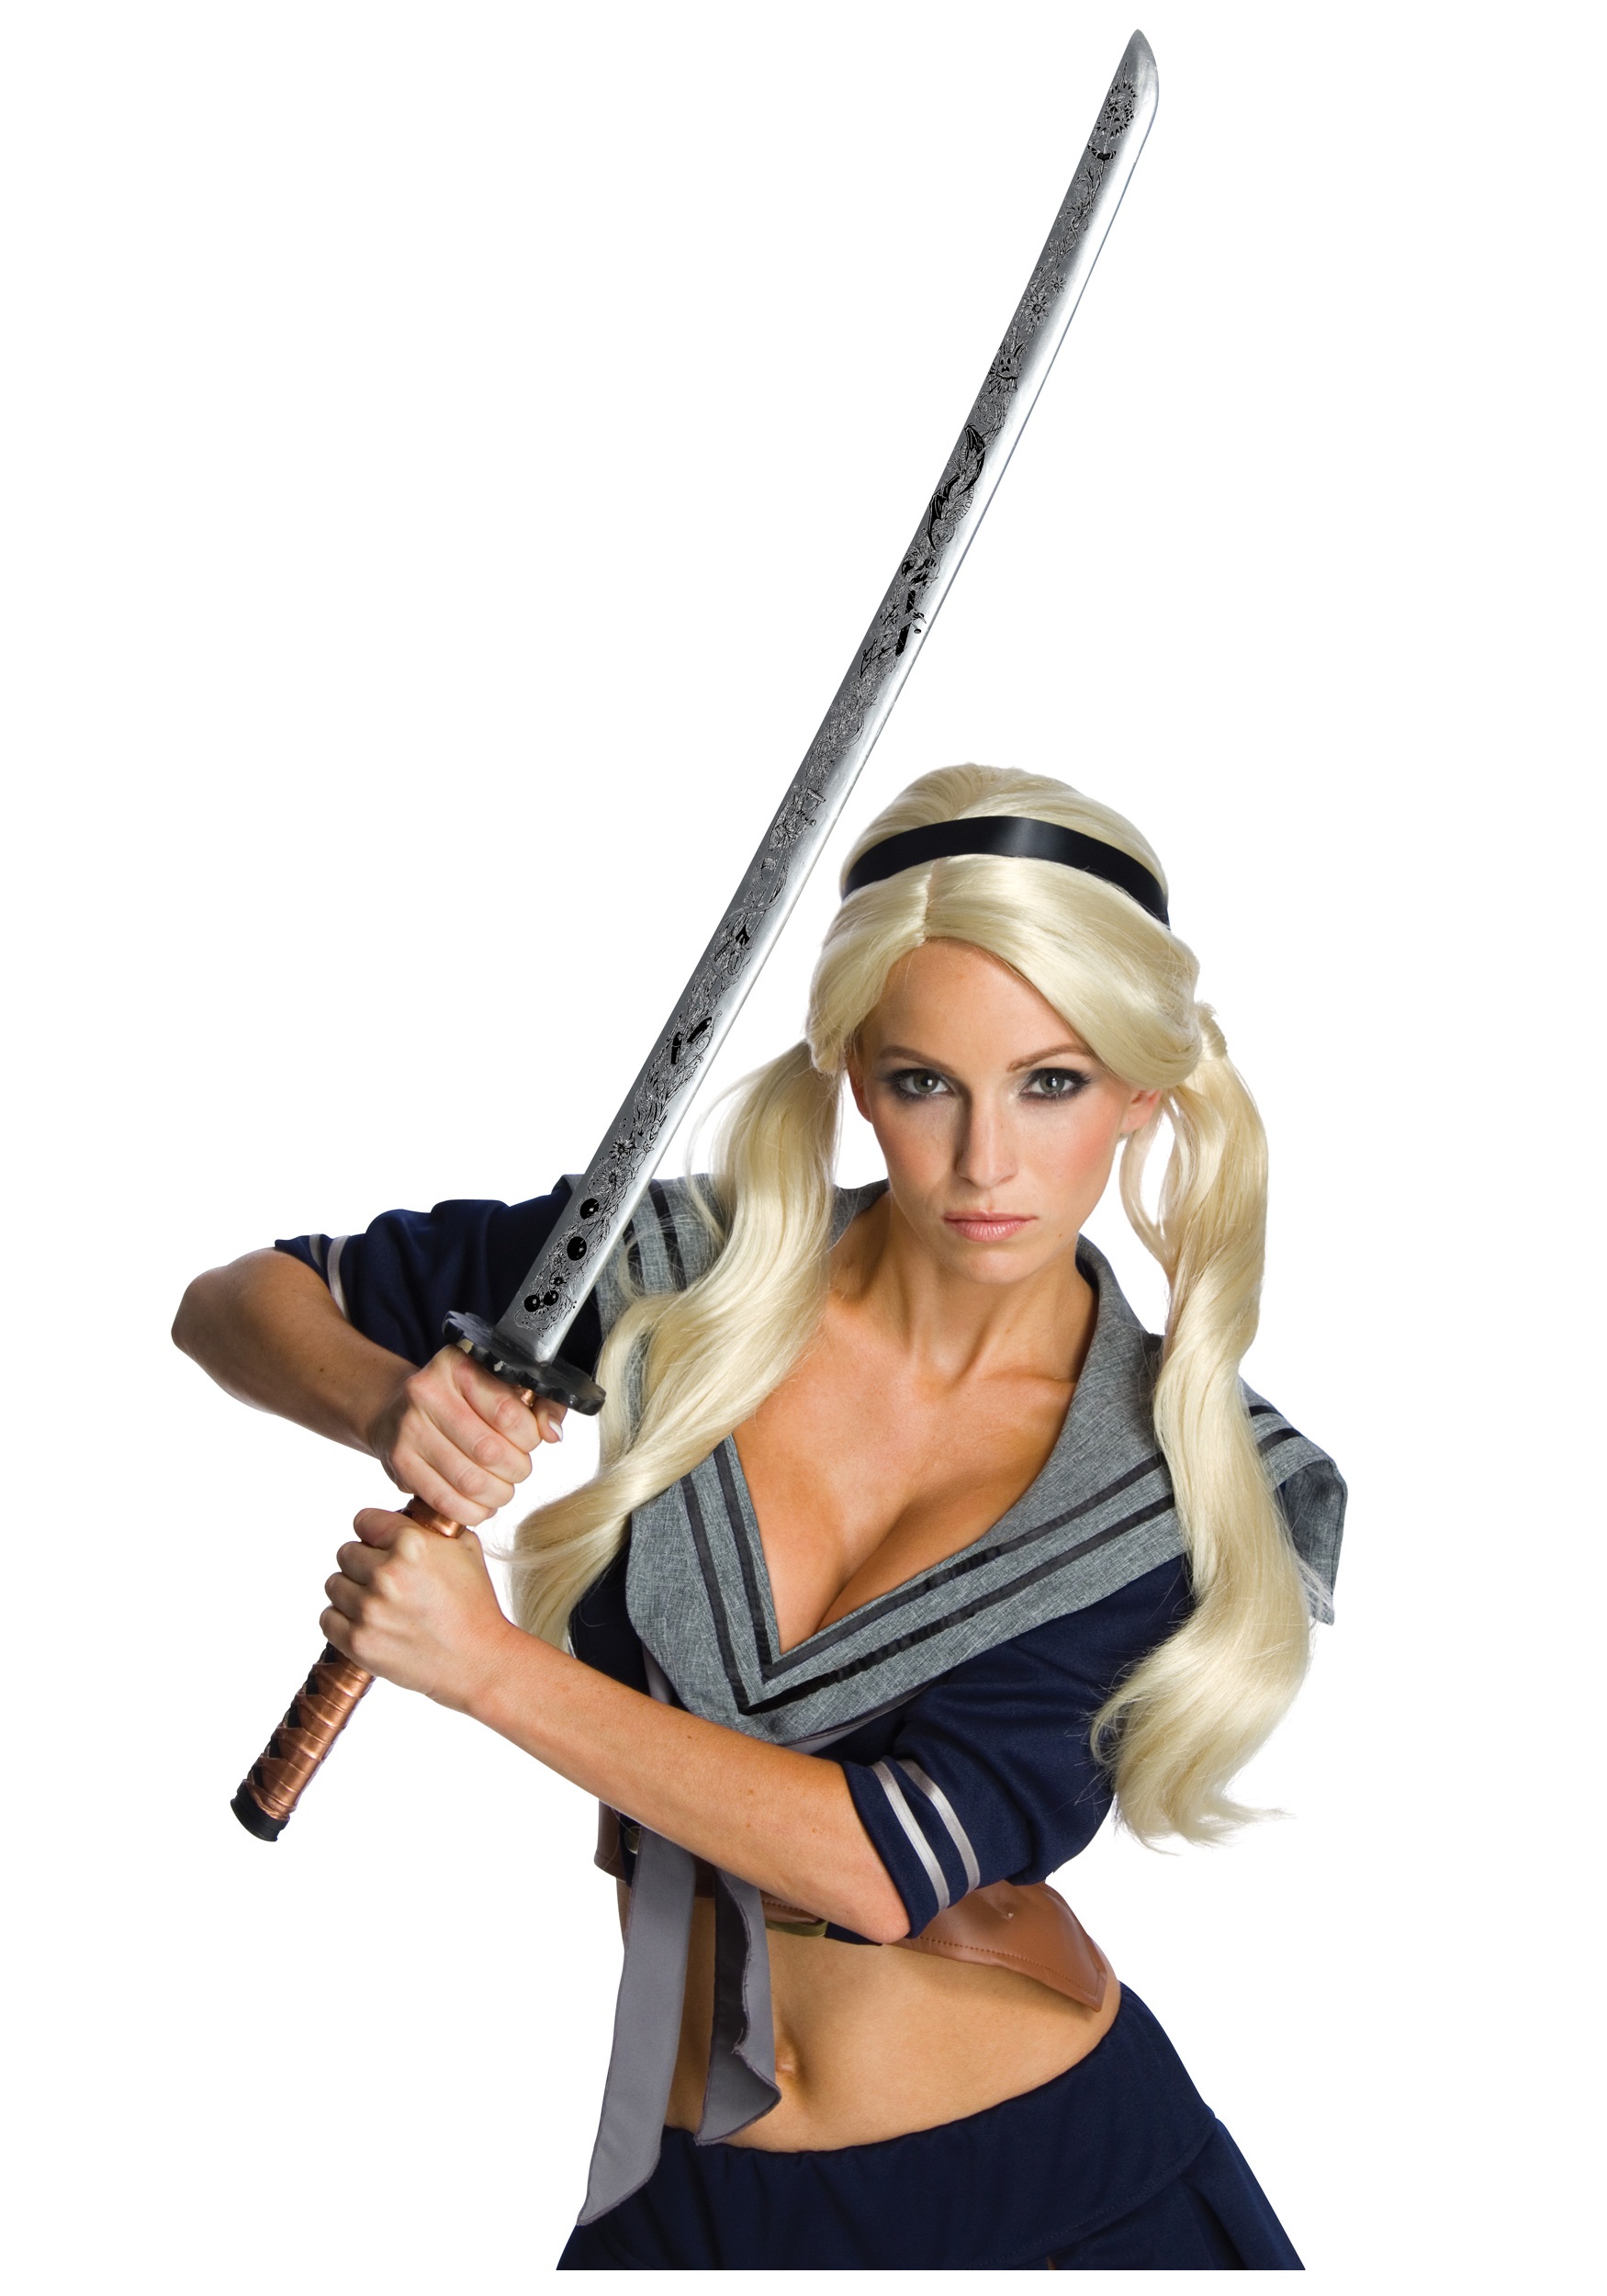 Others would grab this Babydoll Sword and fight back, cutting up anyone in ...